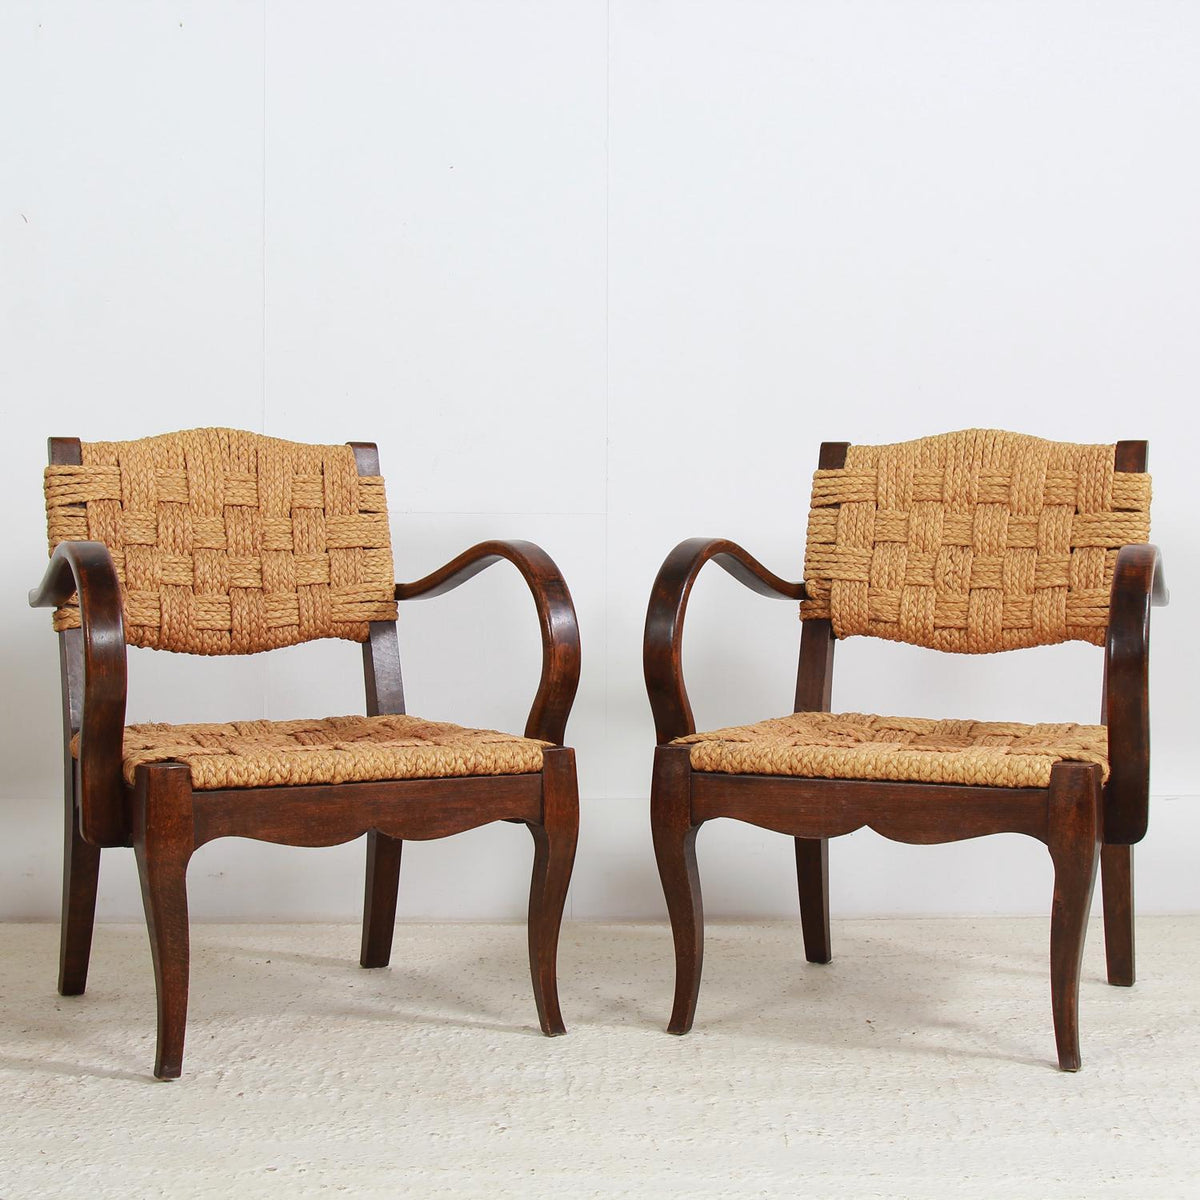 Rare Pair of Armchairs Designed by Adrien Audoux and Frida Minet